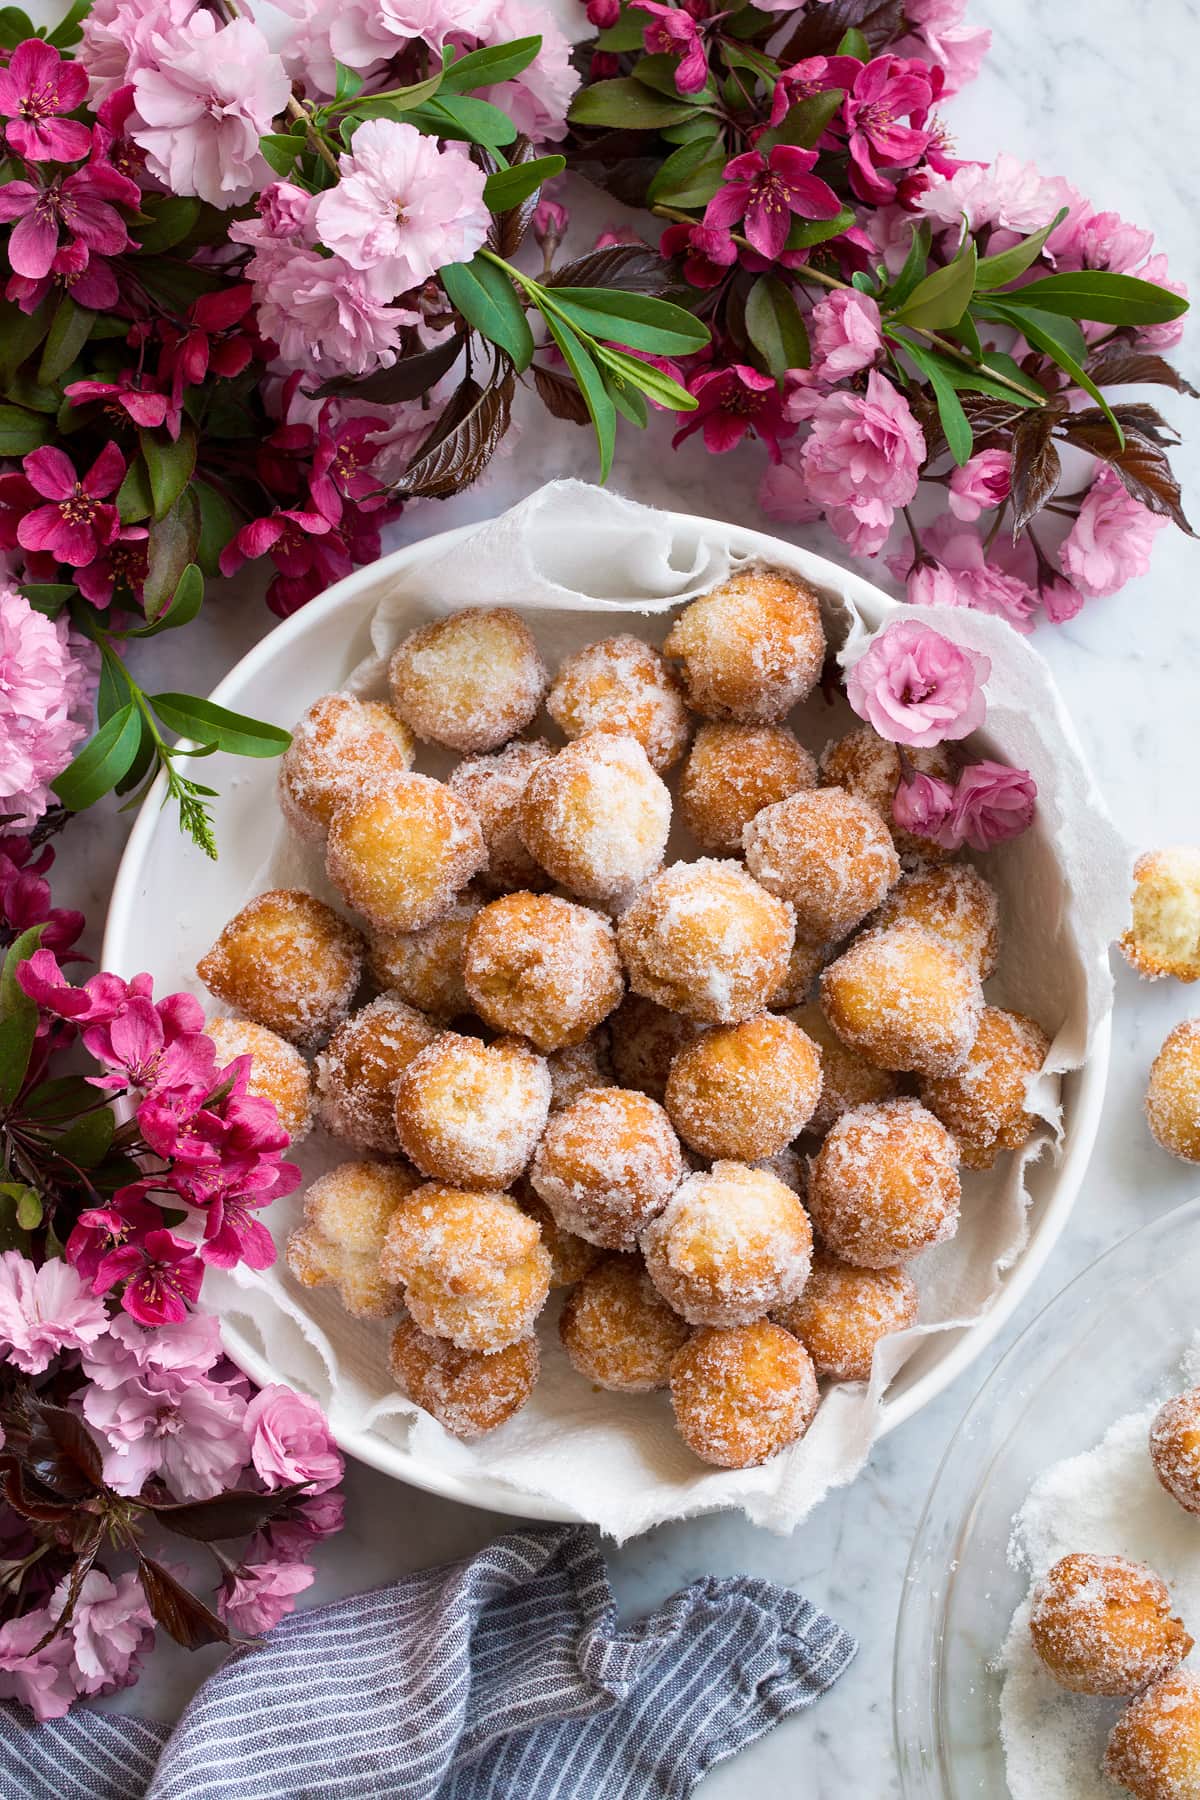 Donut holes in a bowl surrounded by flowers.